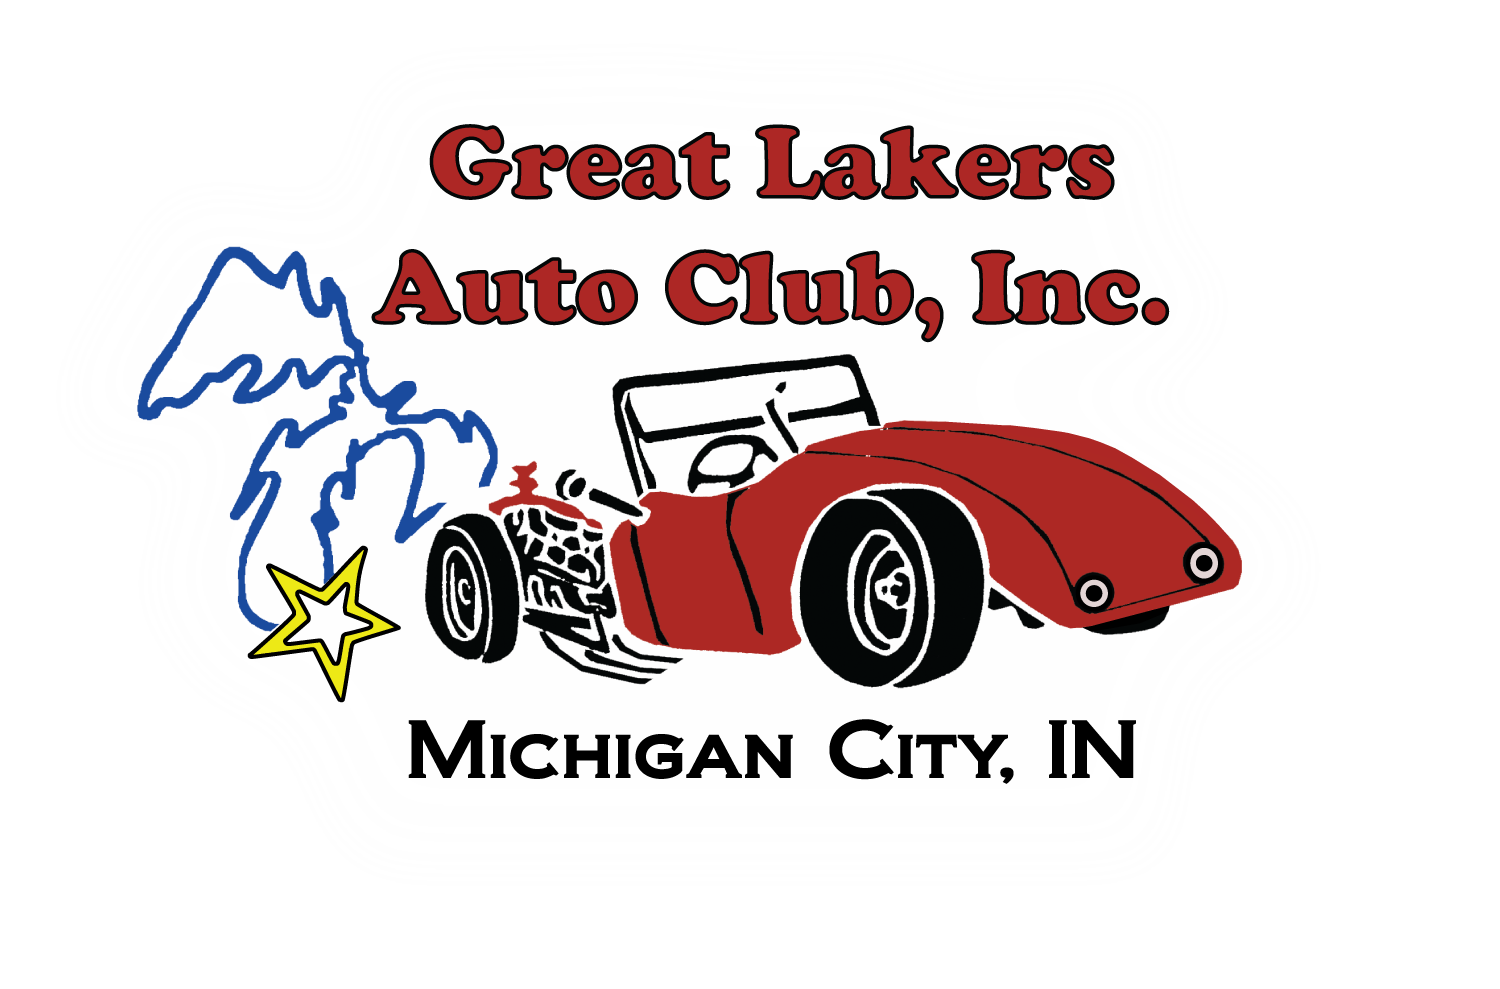 Great Lakers Auto Club, Inc.